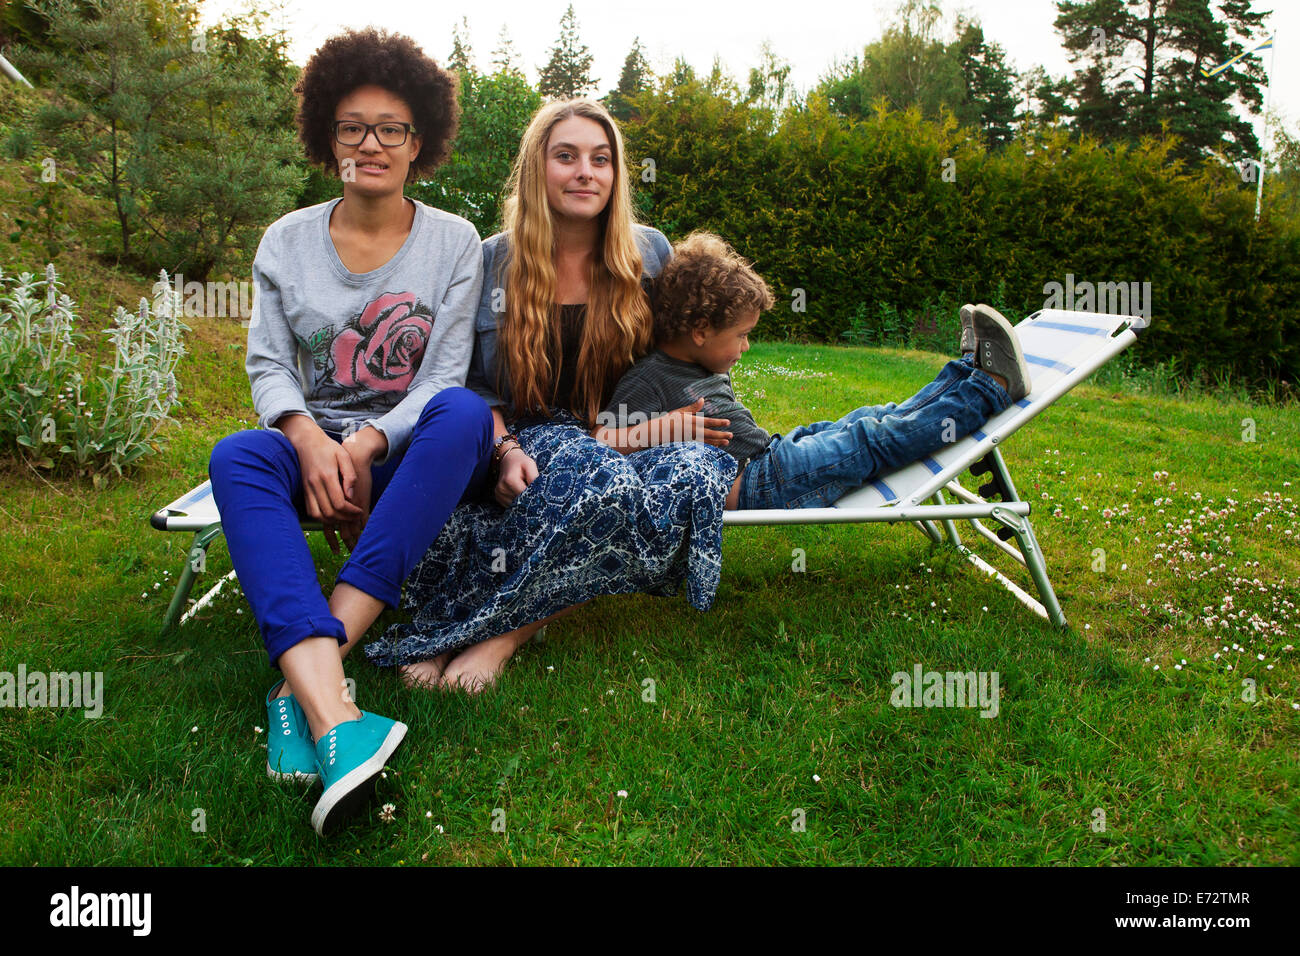 View of teenage girls(13-15, 16-17) and boy (2-3) on deckchair Stock Photo